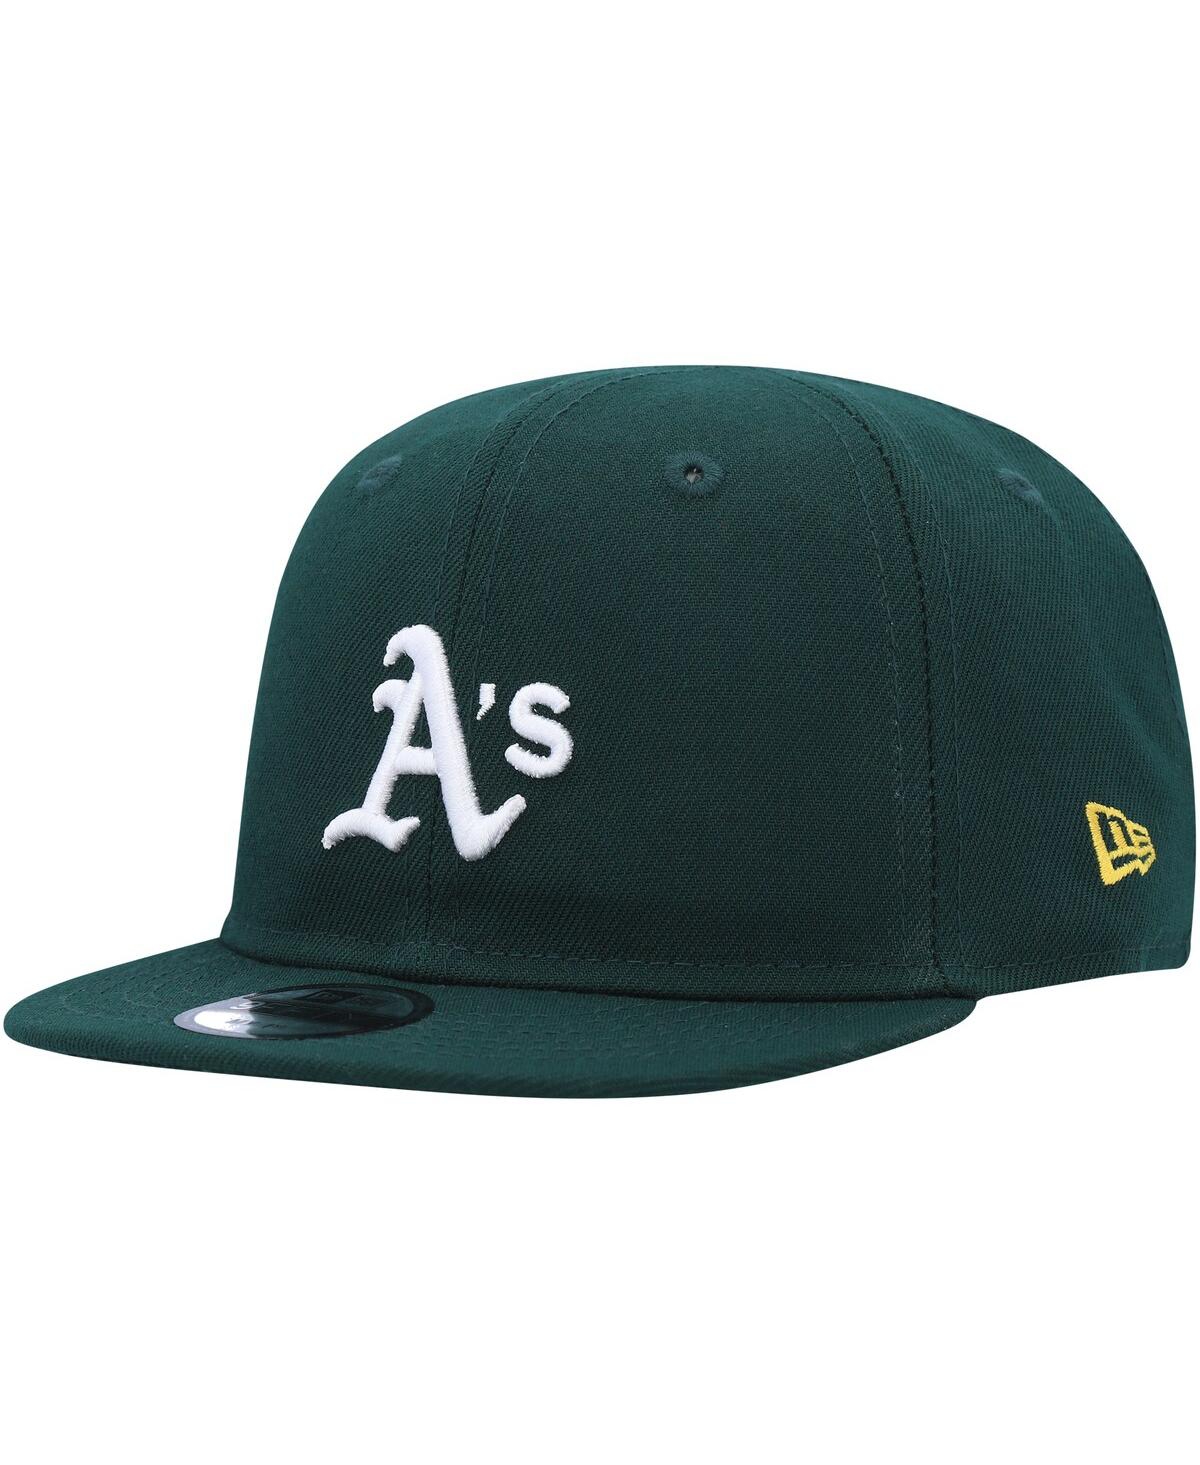 New Era Kids' Infant Boys And Girls  Green Oakland Athletics My First 9fifty Adjustable Hat